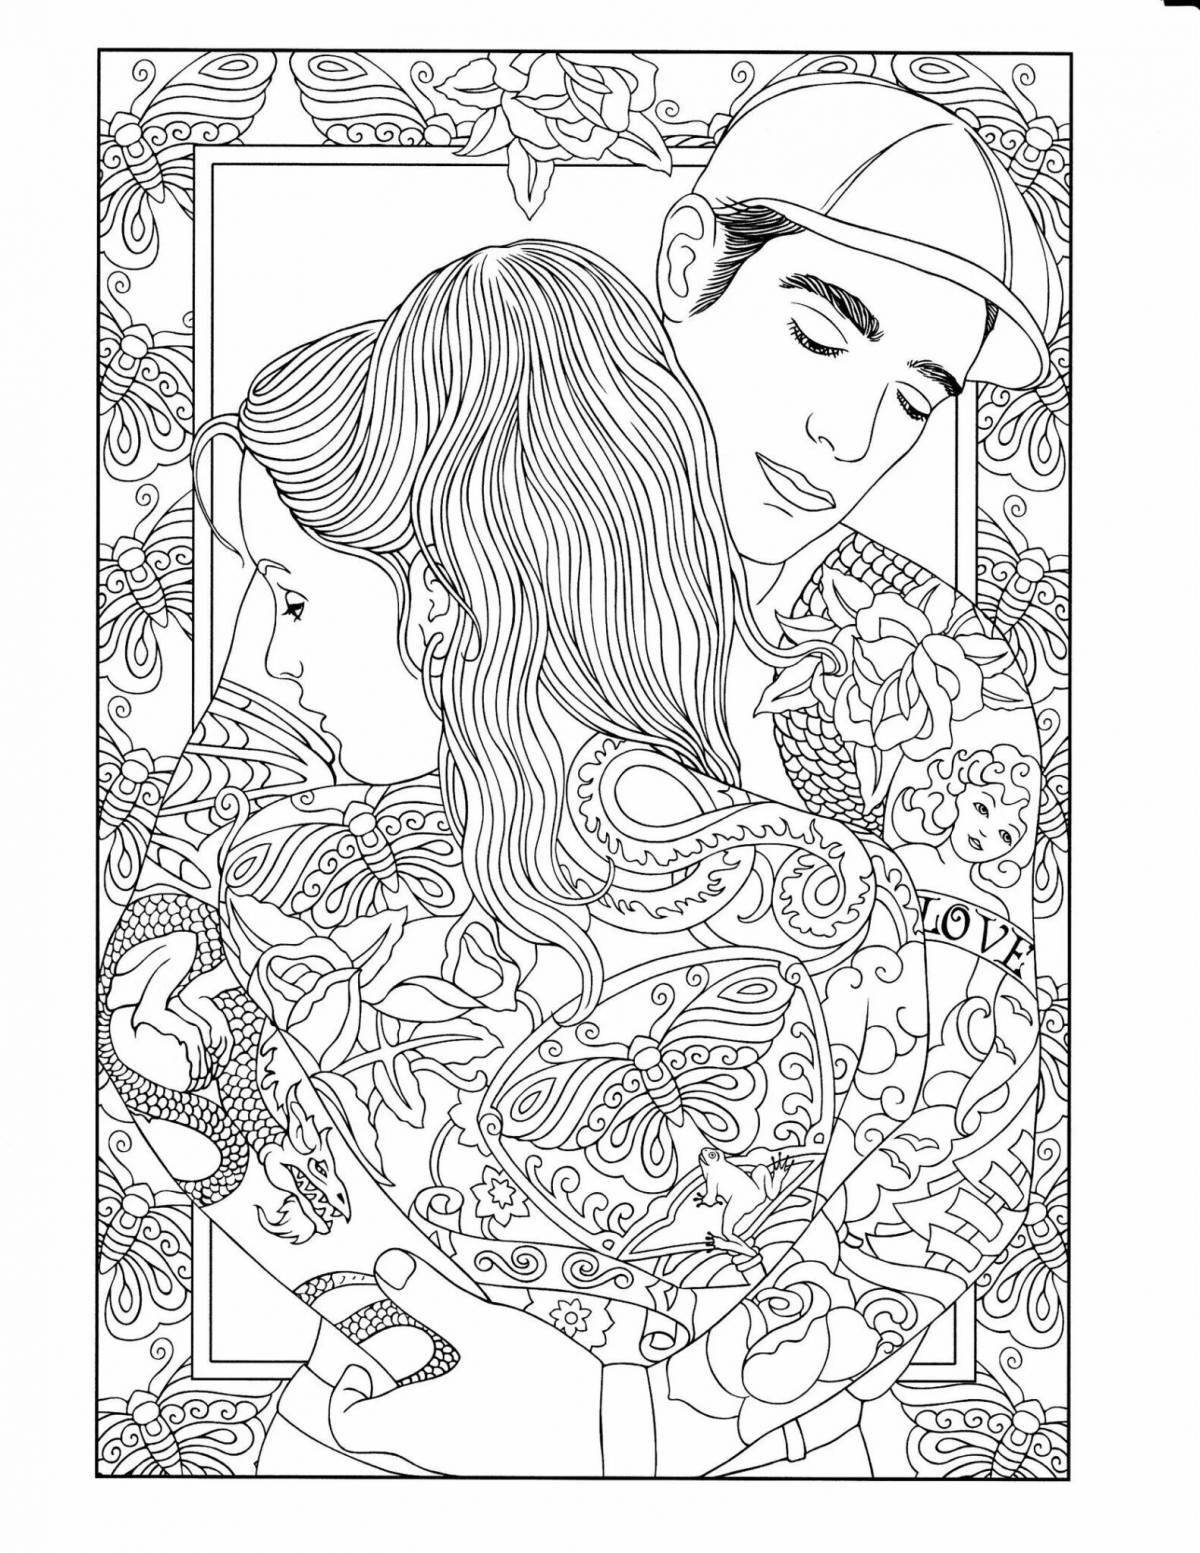 Soothing anti-stress coloring page 18